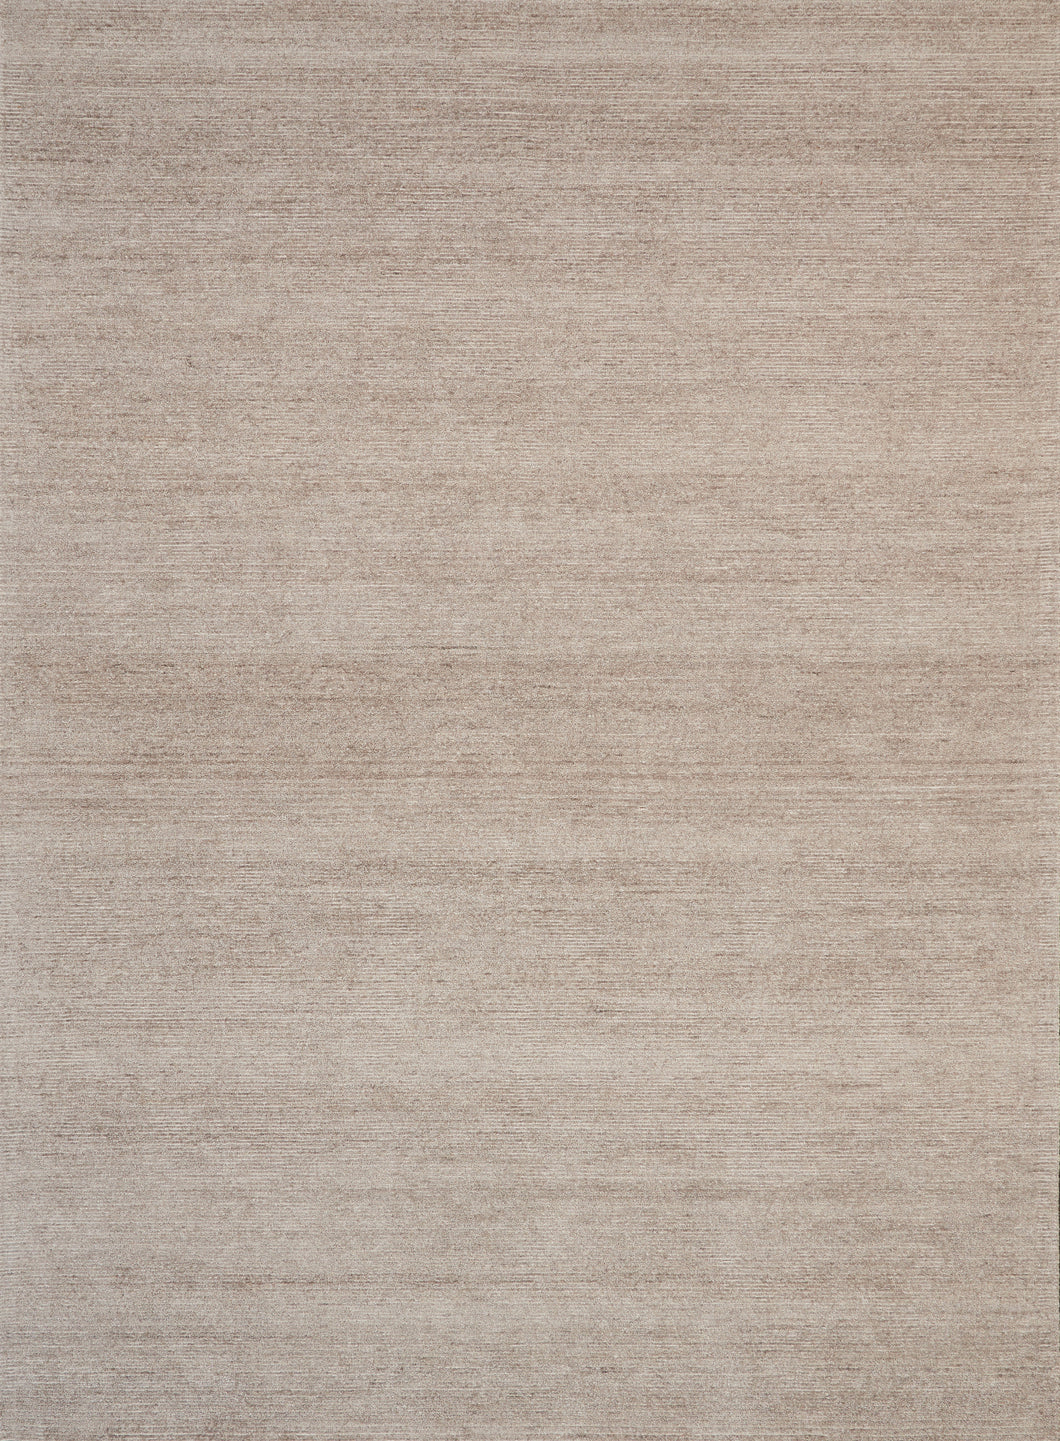 Nourison Weston WES01 Taupe 10'x14' Textured Rug WES01 Oatmeal